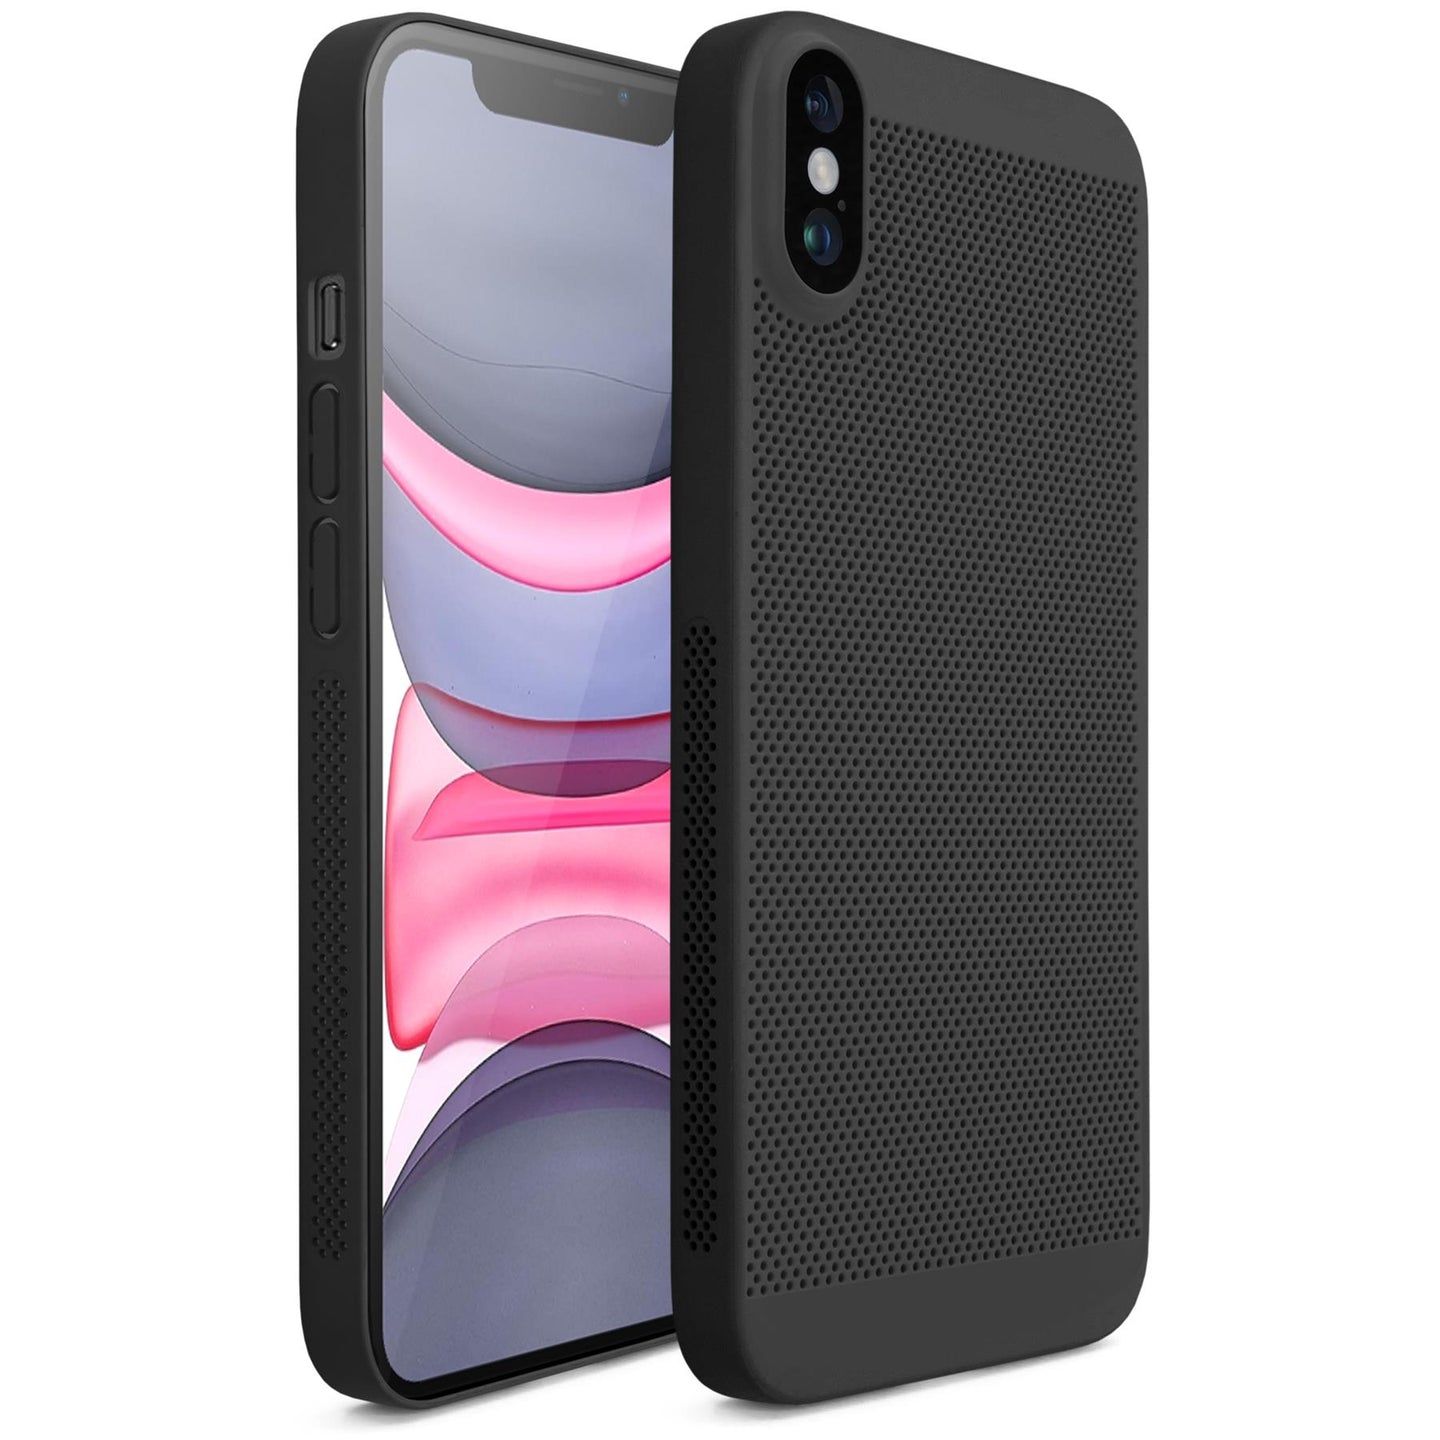 Moozy VentiGuard Phone Case for iPhone X / XS, Black, 5.8-inch - Breathable Cover with Perforated Pattern for Air Circulation, Ventilation, Anti-Overheating Phone Case